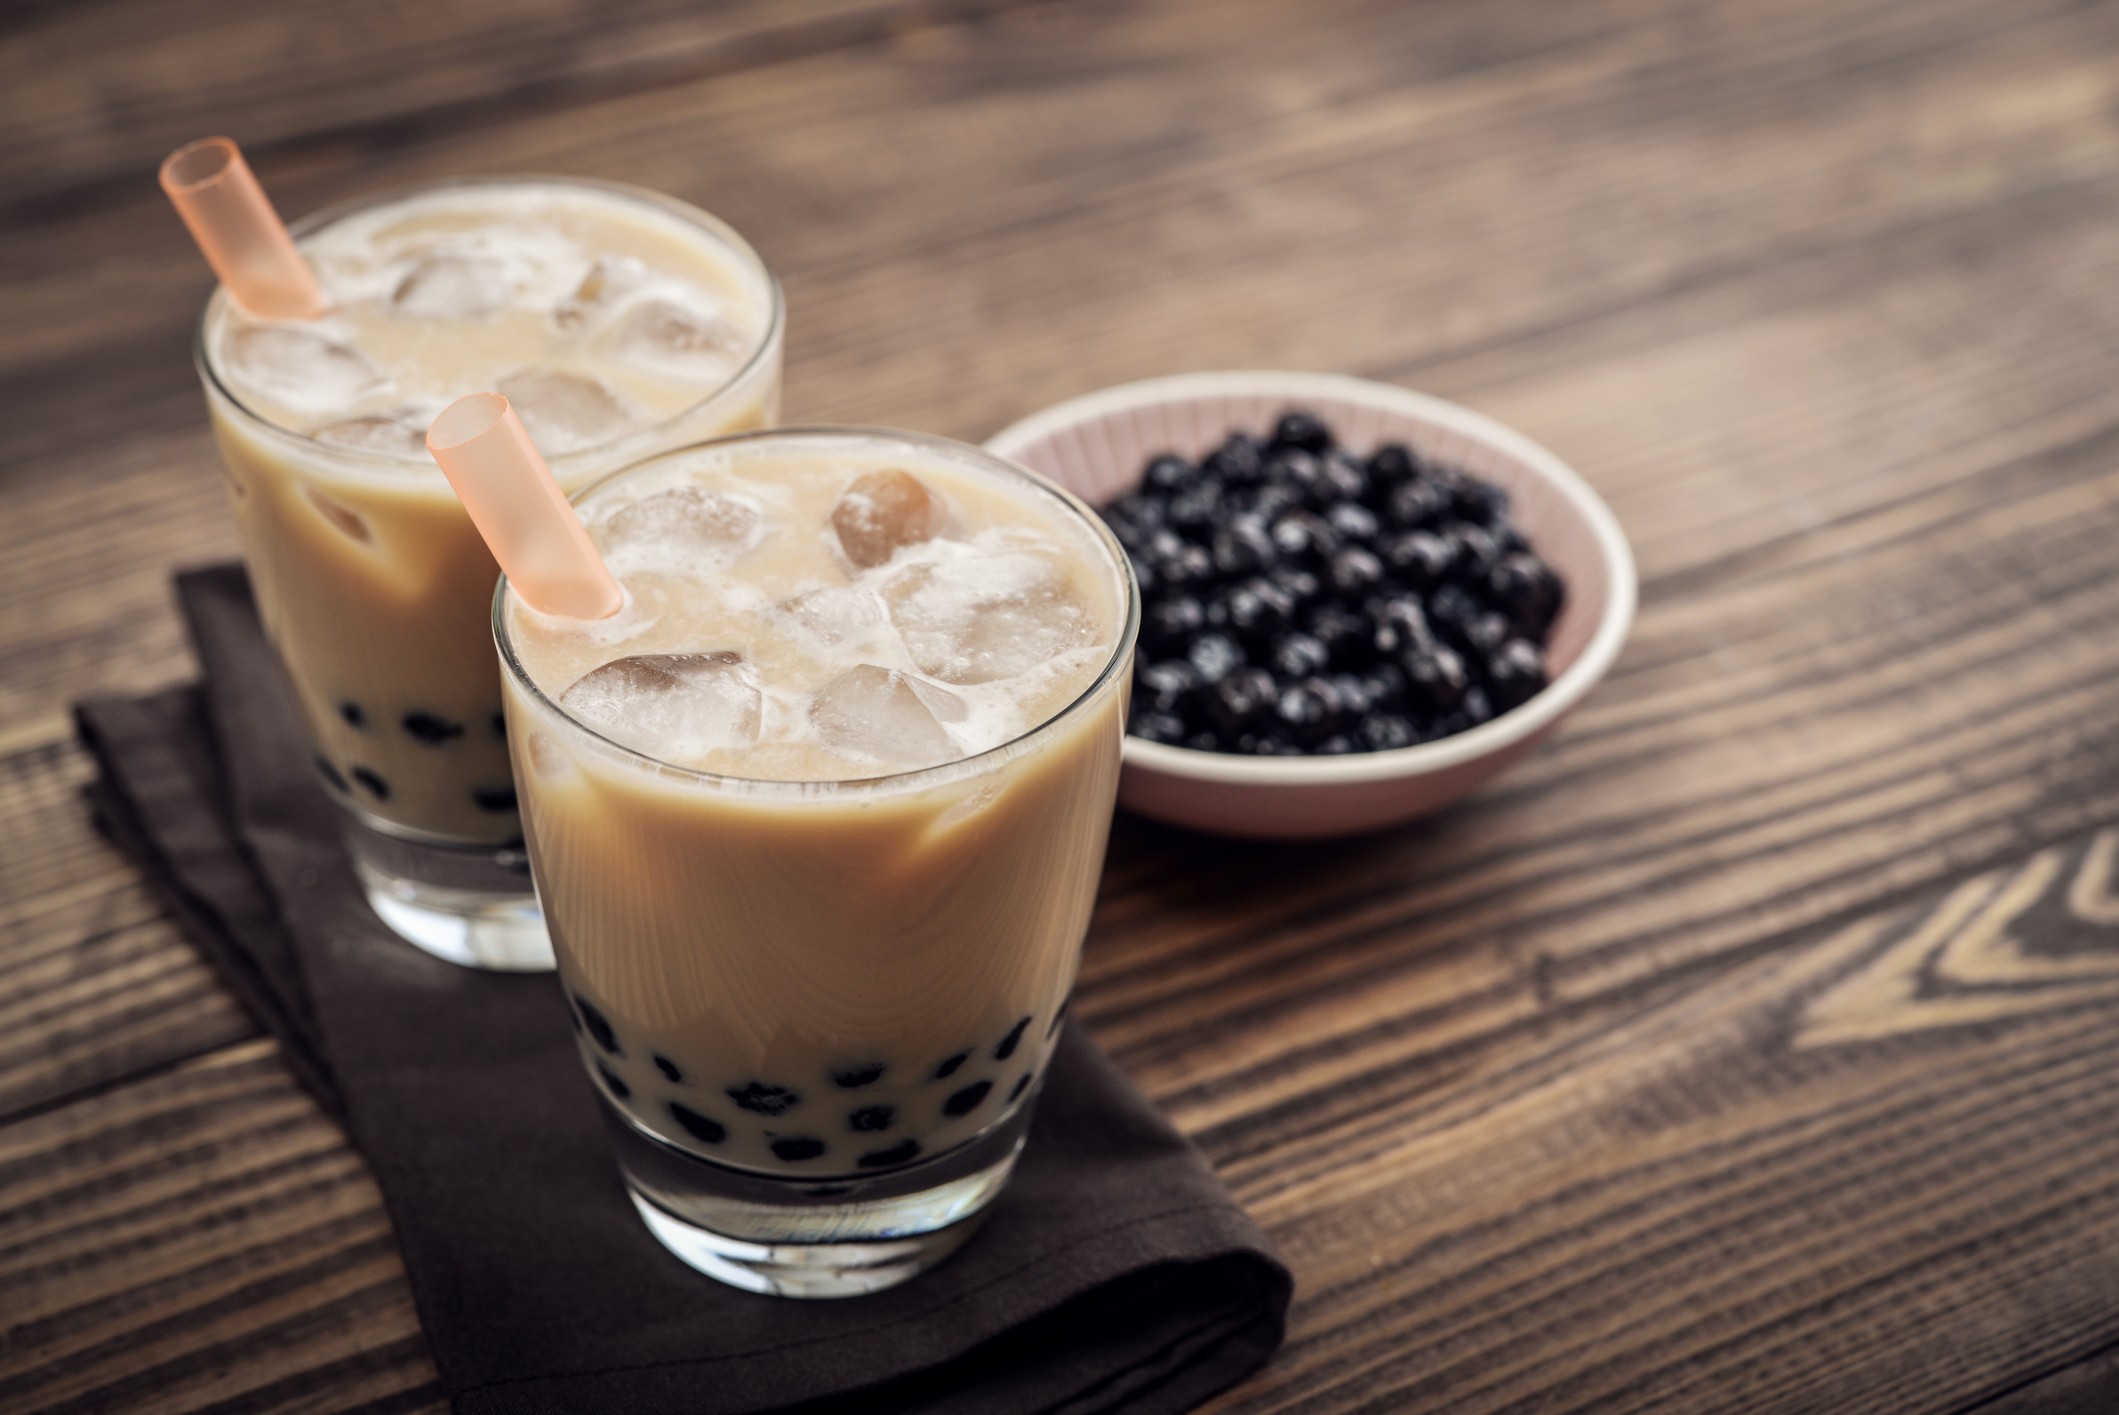 Boba tea has been commercialised after it took the world by storm in recent years. It is among our selection of the five best Asian milk teas waiting to be enjoyed in Hong Kong this summer.